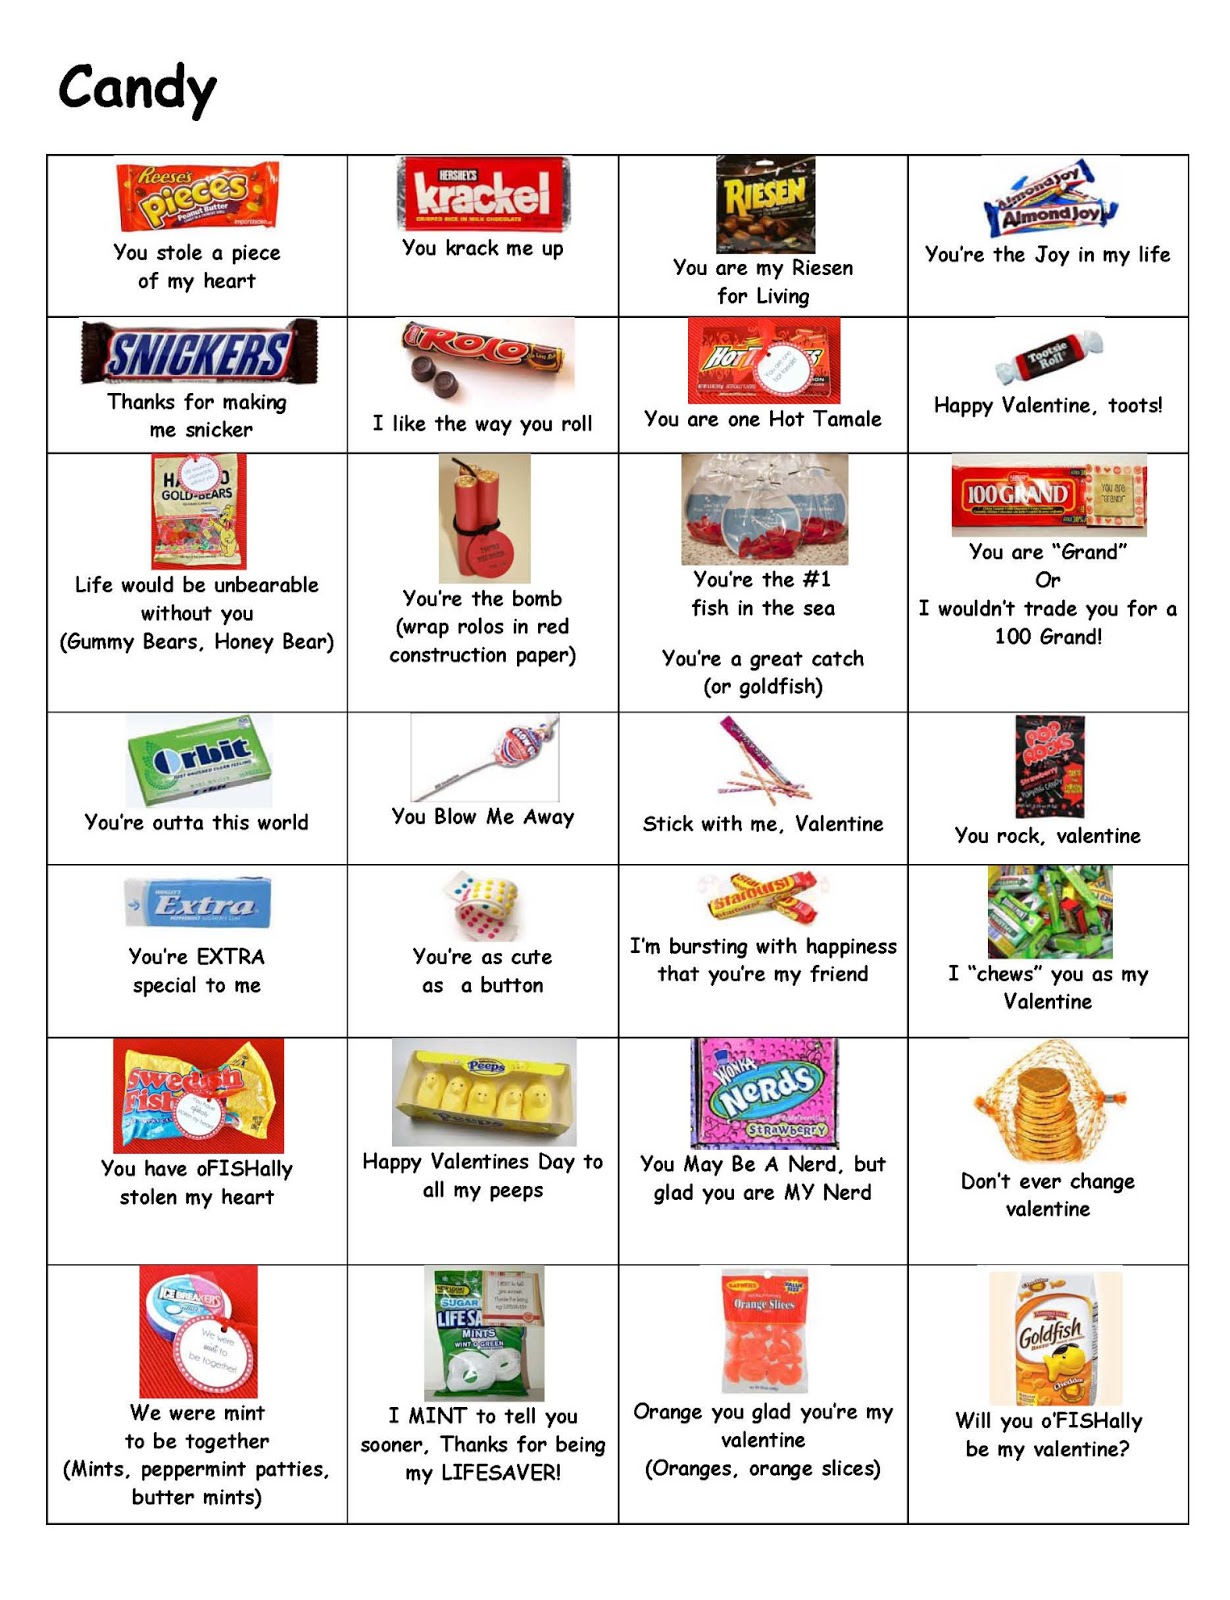 School Stuff on Pinterest | Candy Bar Sayings, Candy Sayings and Candy Bars1230 x 1600